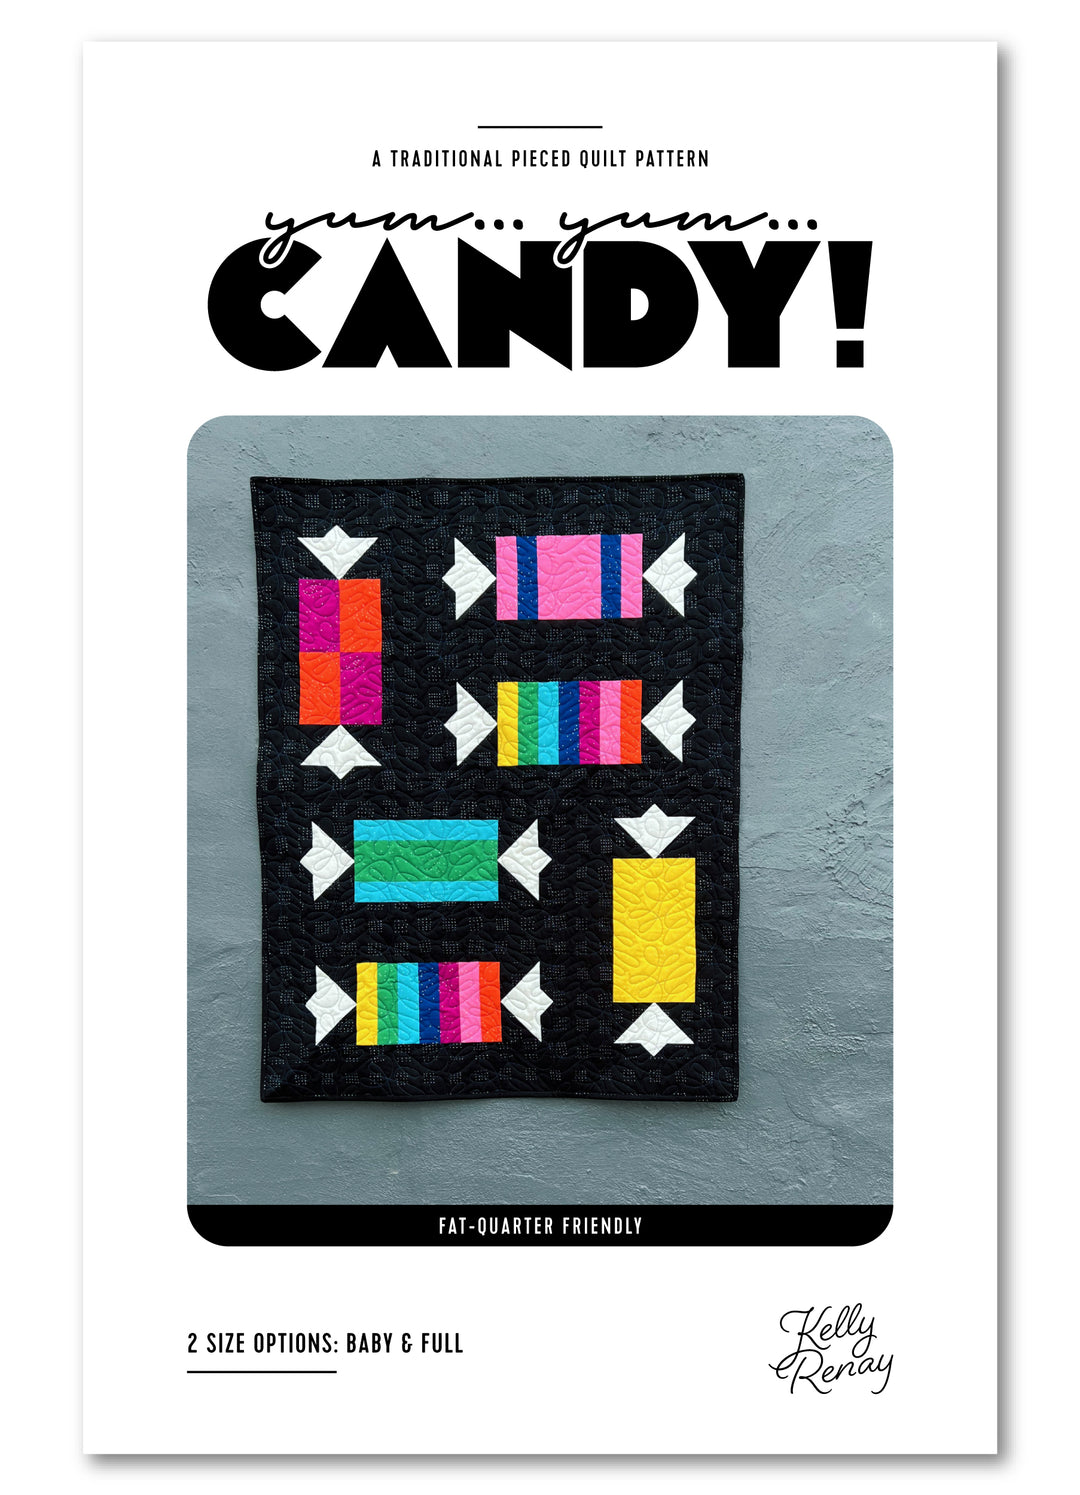 Yum Yum Candy Quilt Pattern - Wholesale